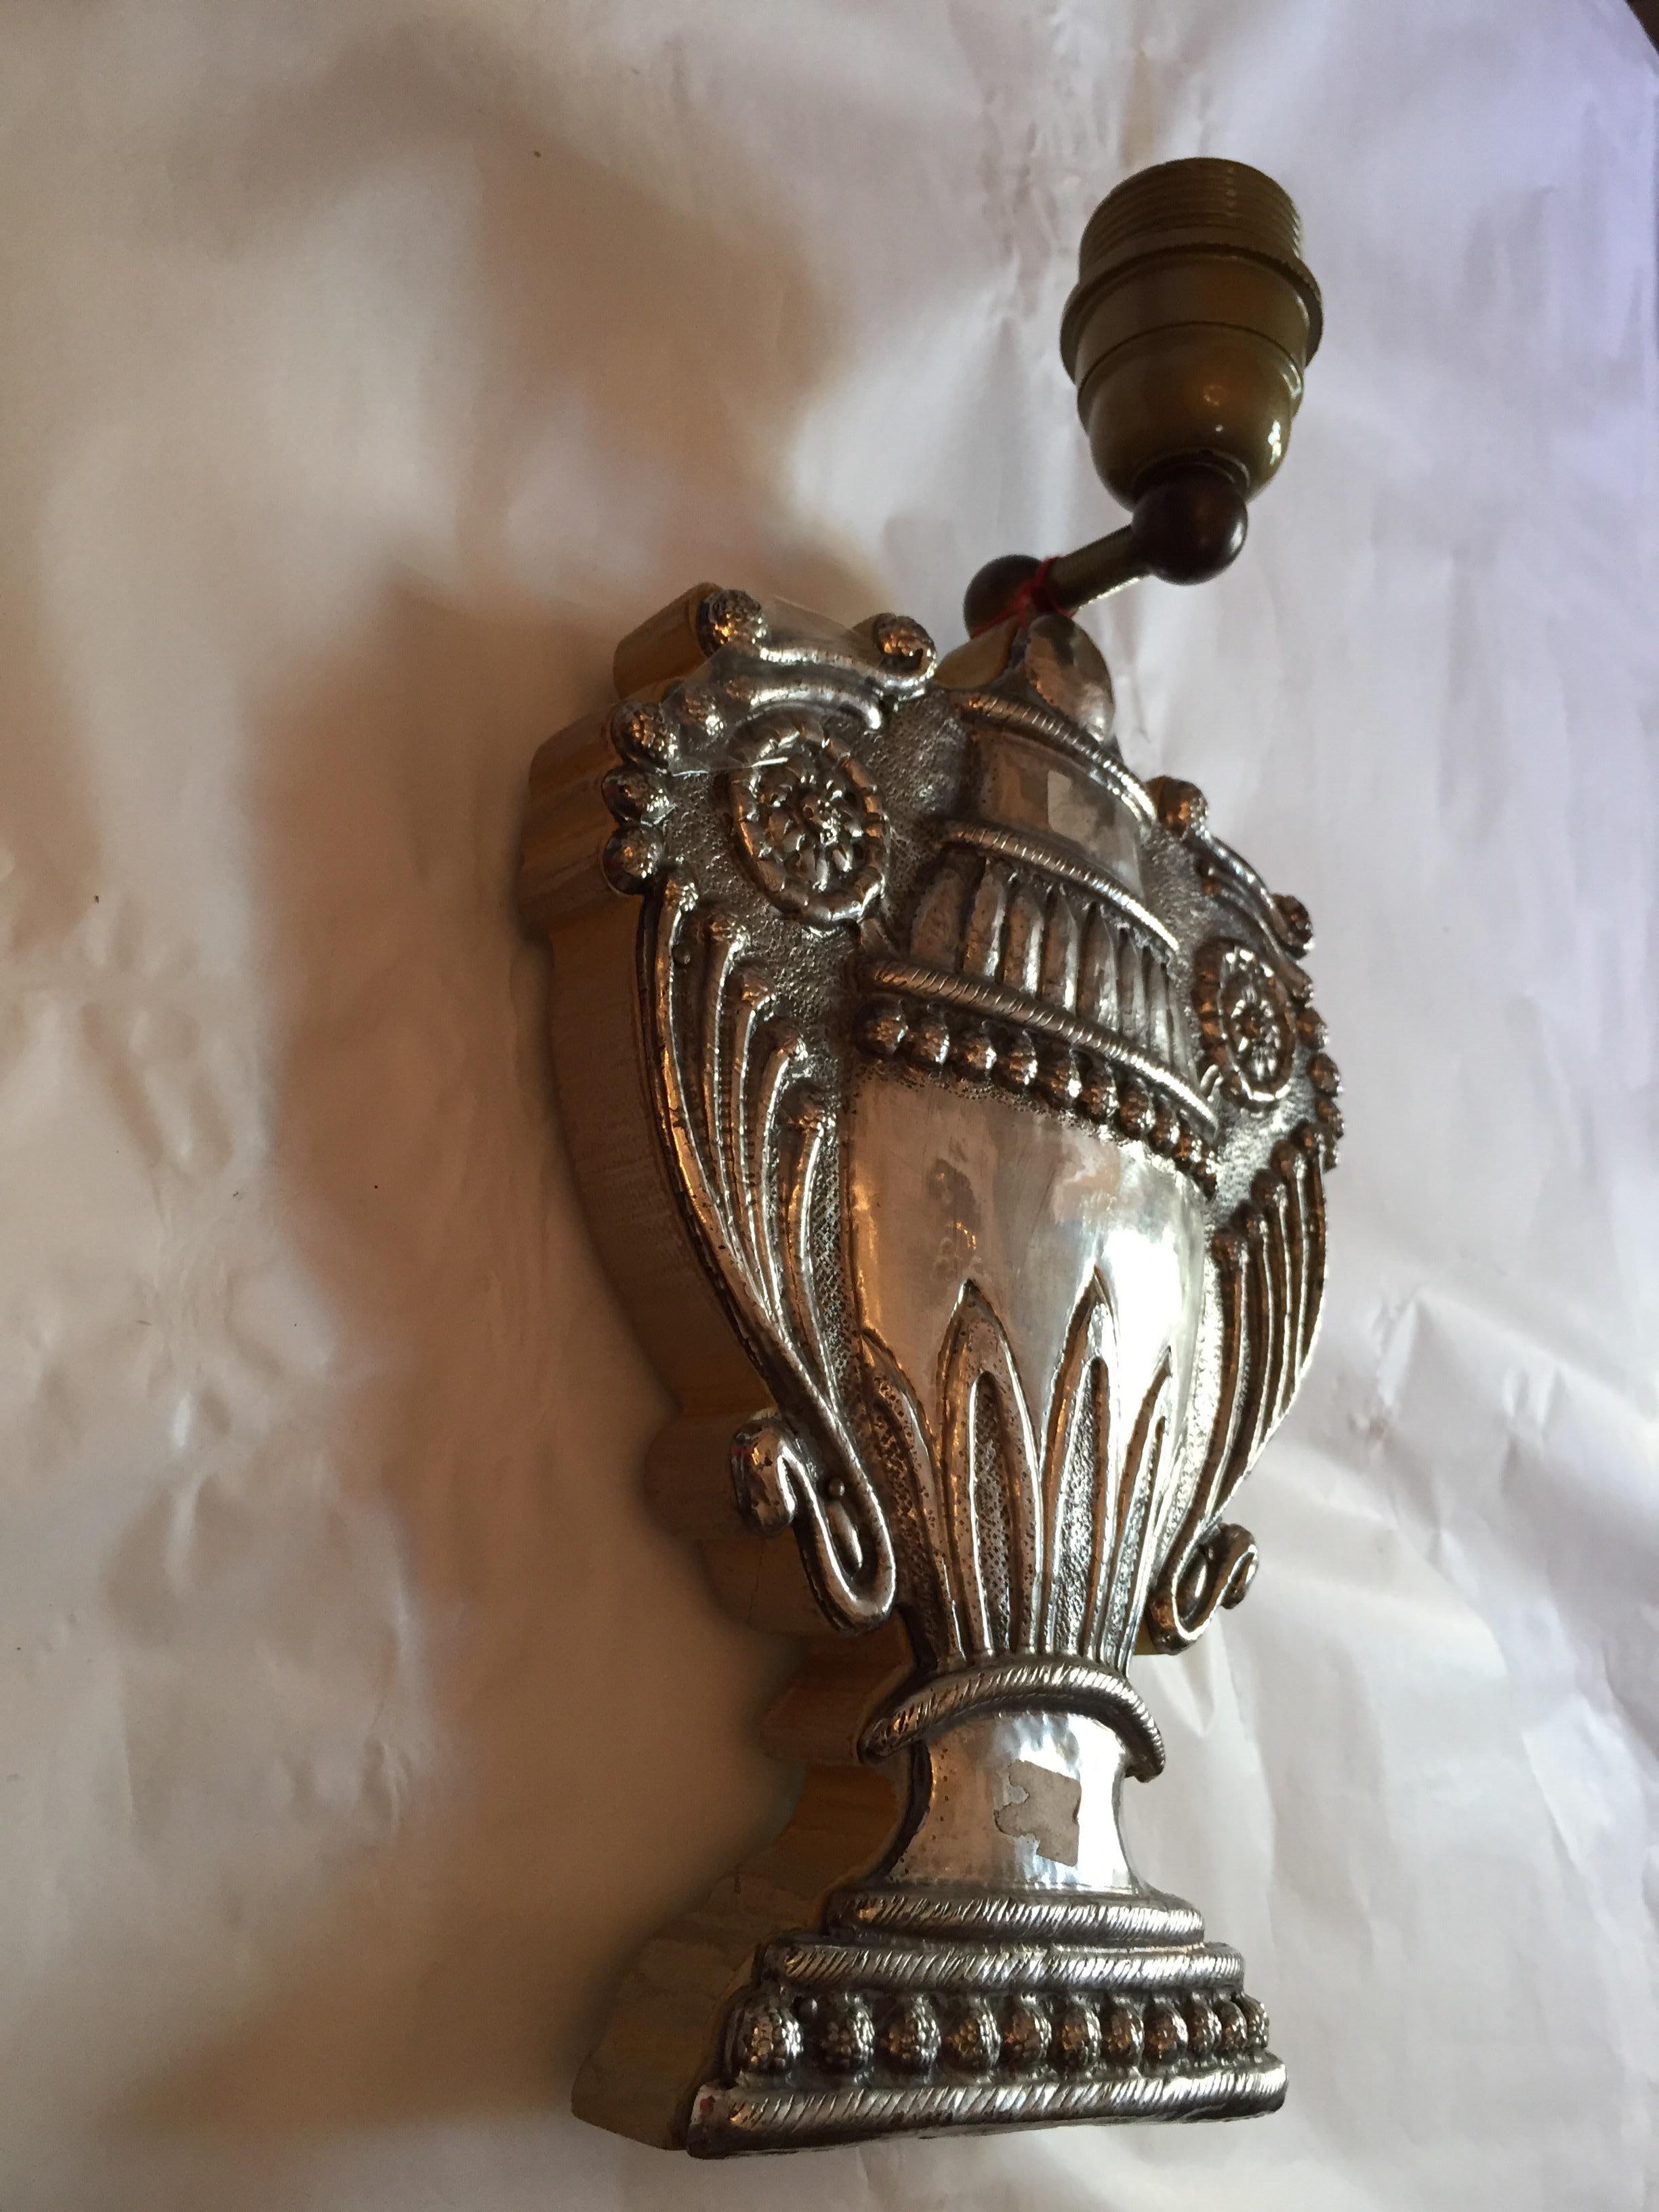 Italian Repoussé Silvered Sconce Urn Vase Wall-Light 20th Century Baroque Style For Sale 2